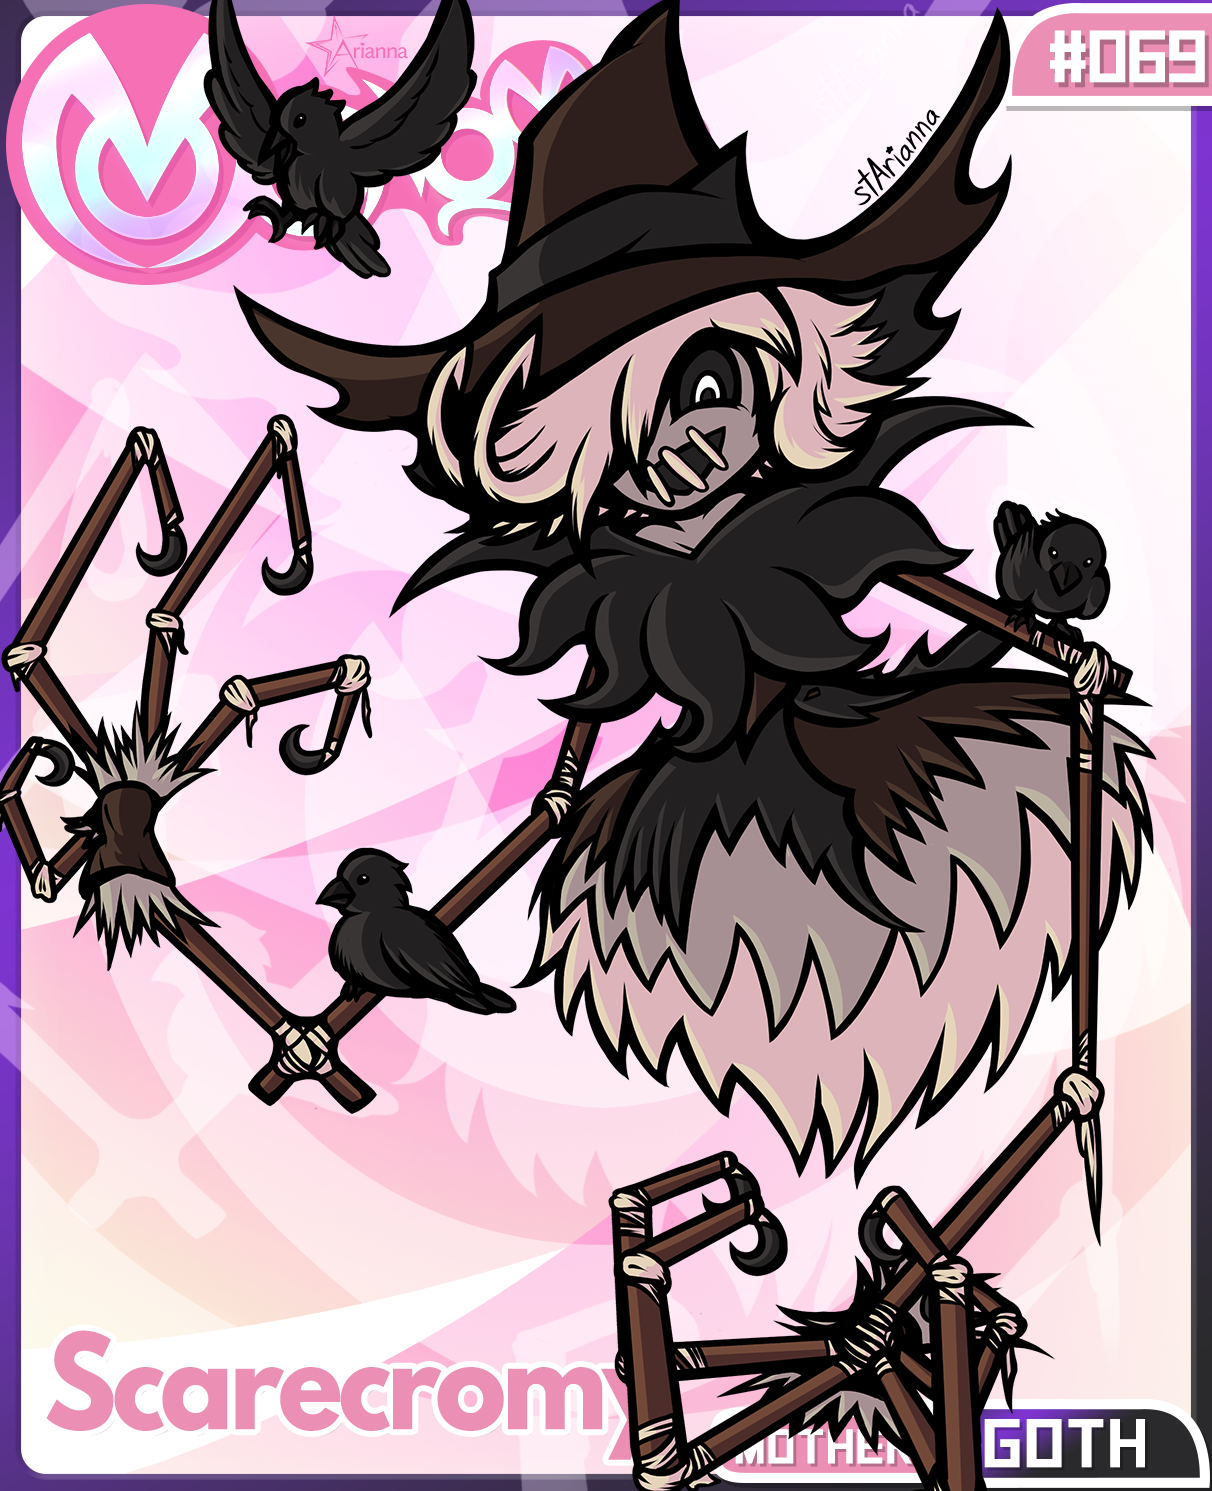 Scarecromy, Monommy #069, a mother class goth-type